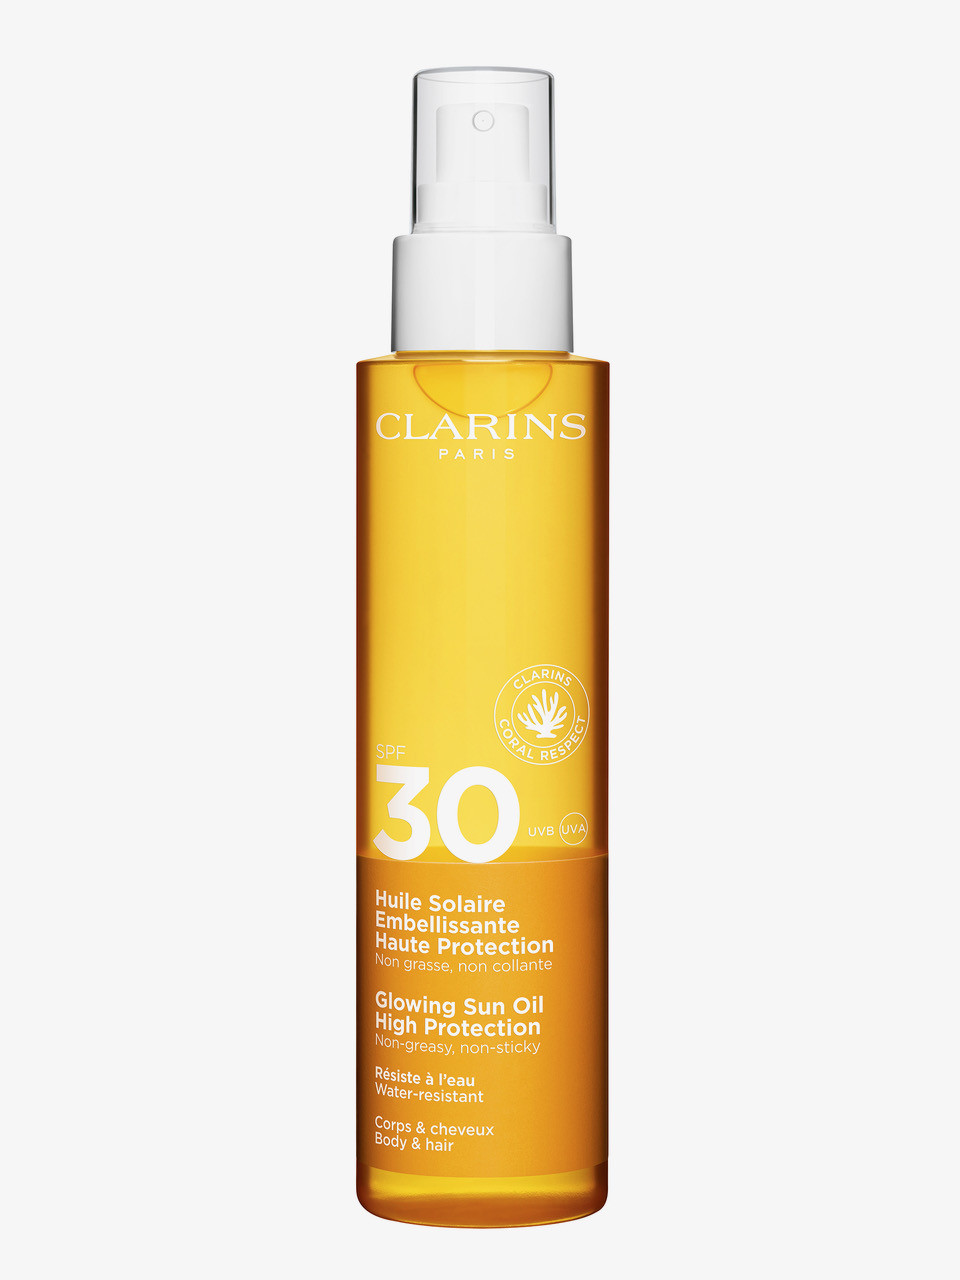 Huile Solaire Embellisante Haute Protection SPF30